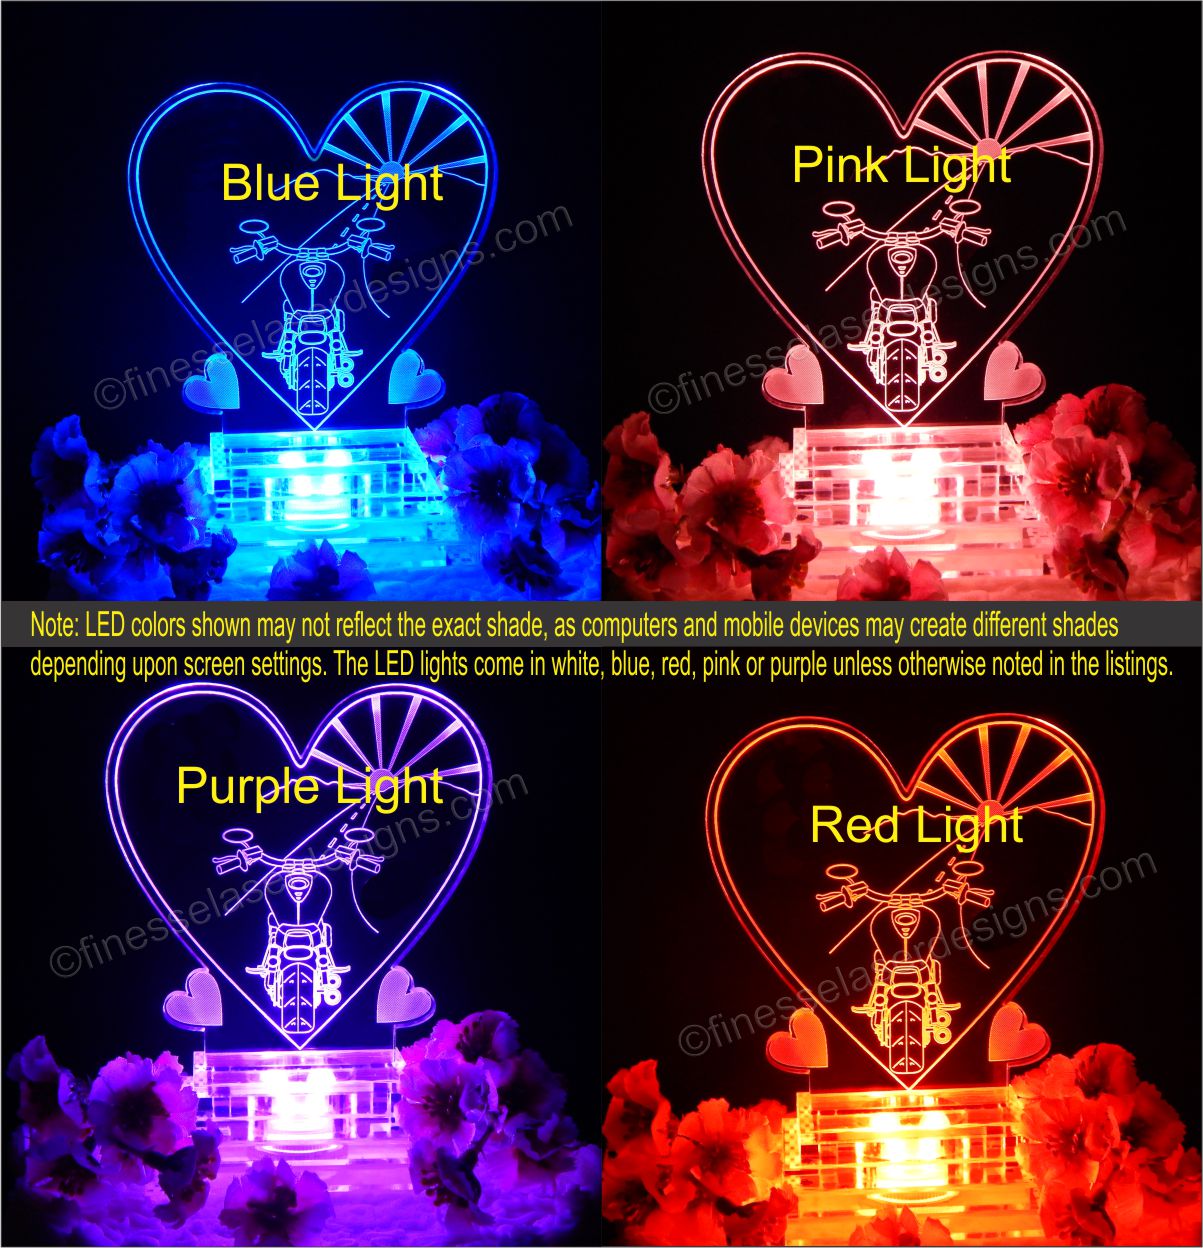 Colored light views of heart shaped acrylic cake topper showing backside motorcycle view driving towards sunset, with blue, pink, purple and red lighted views